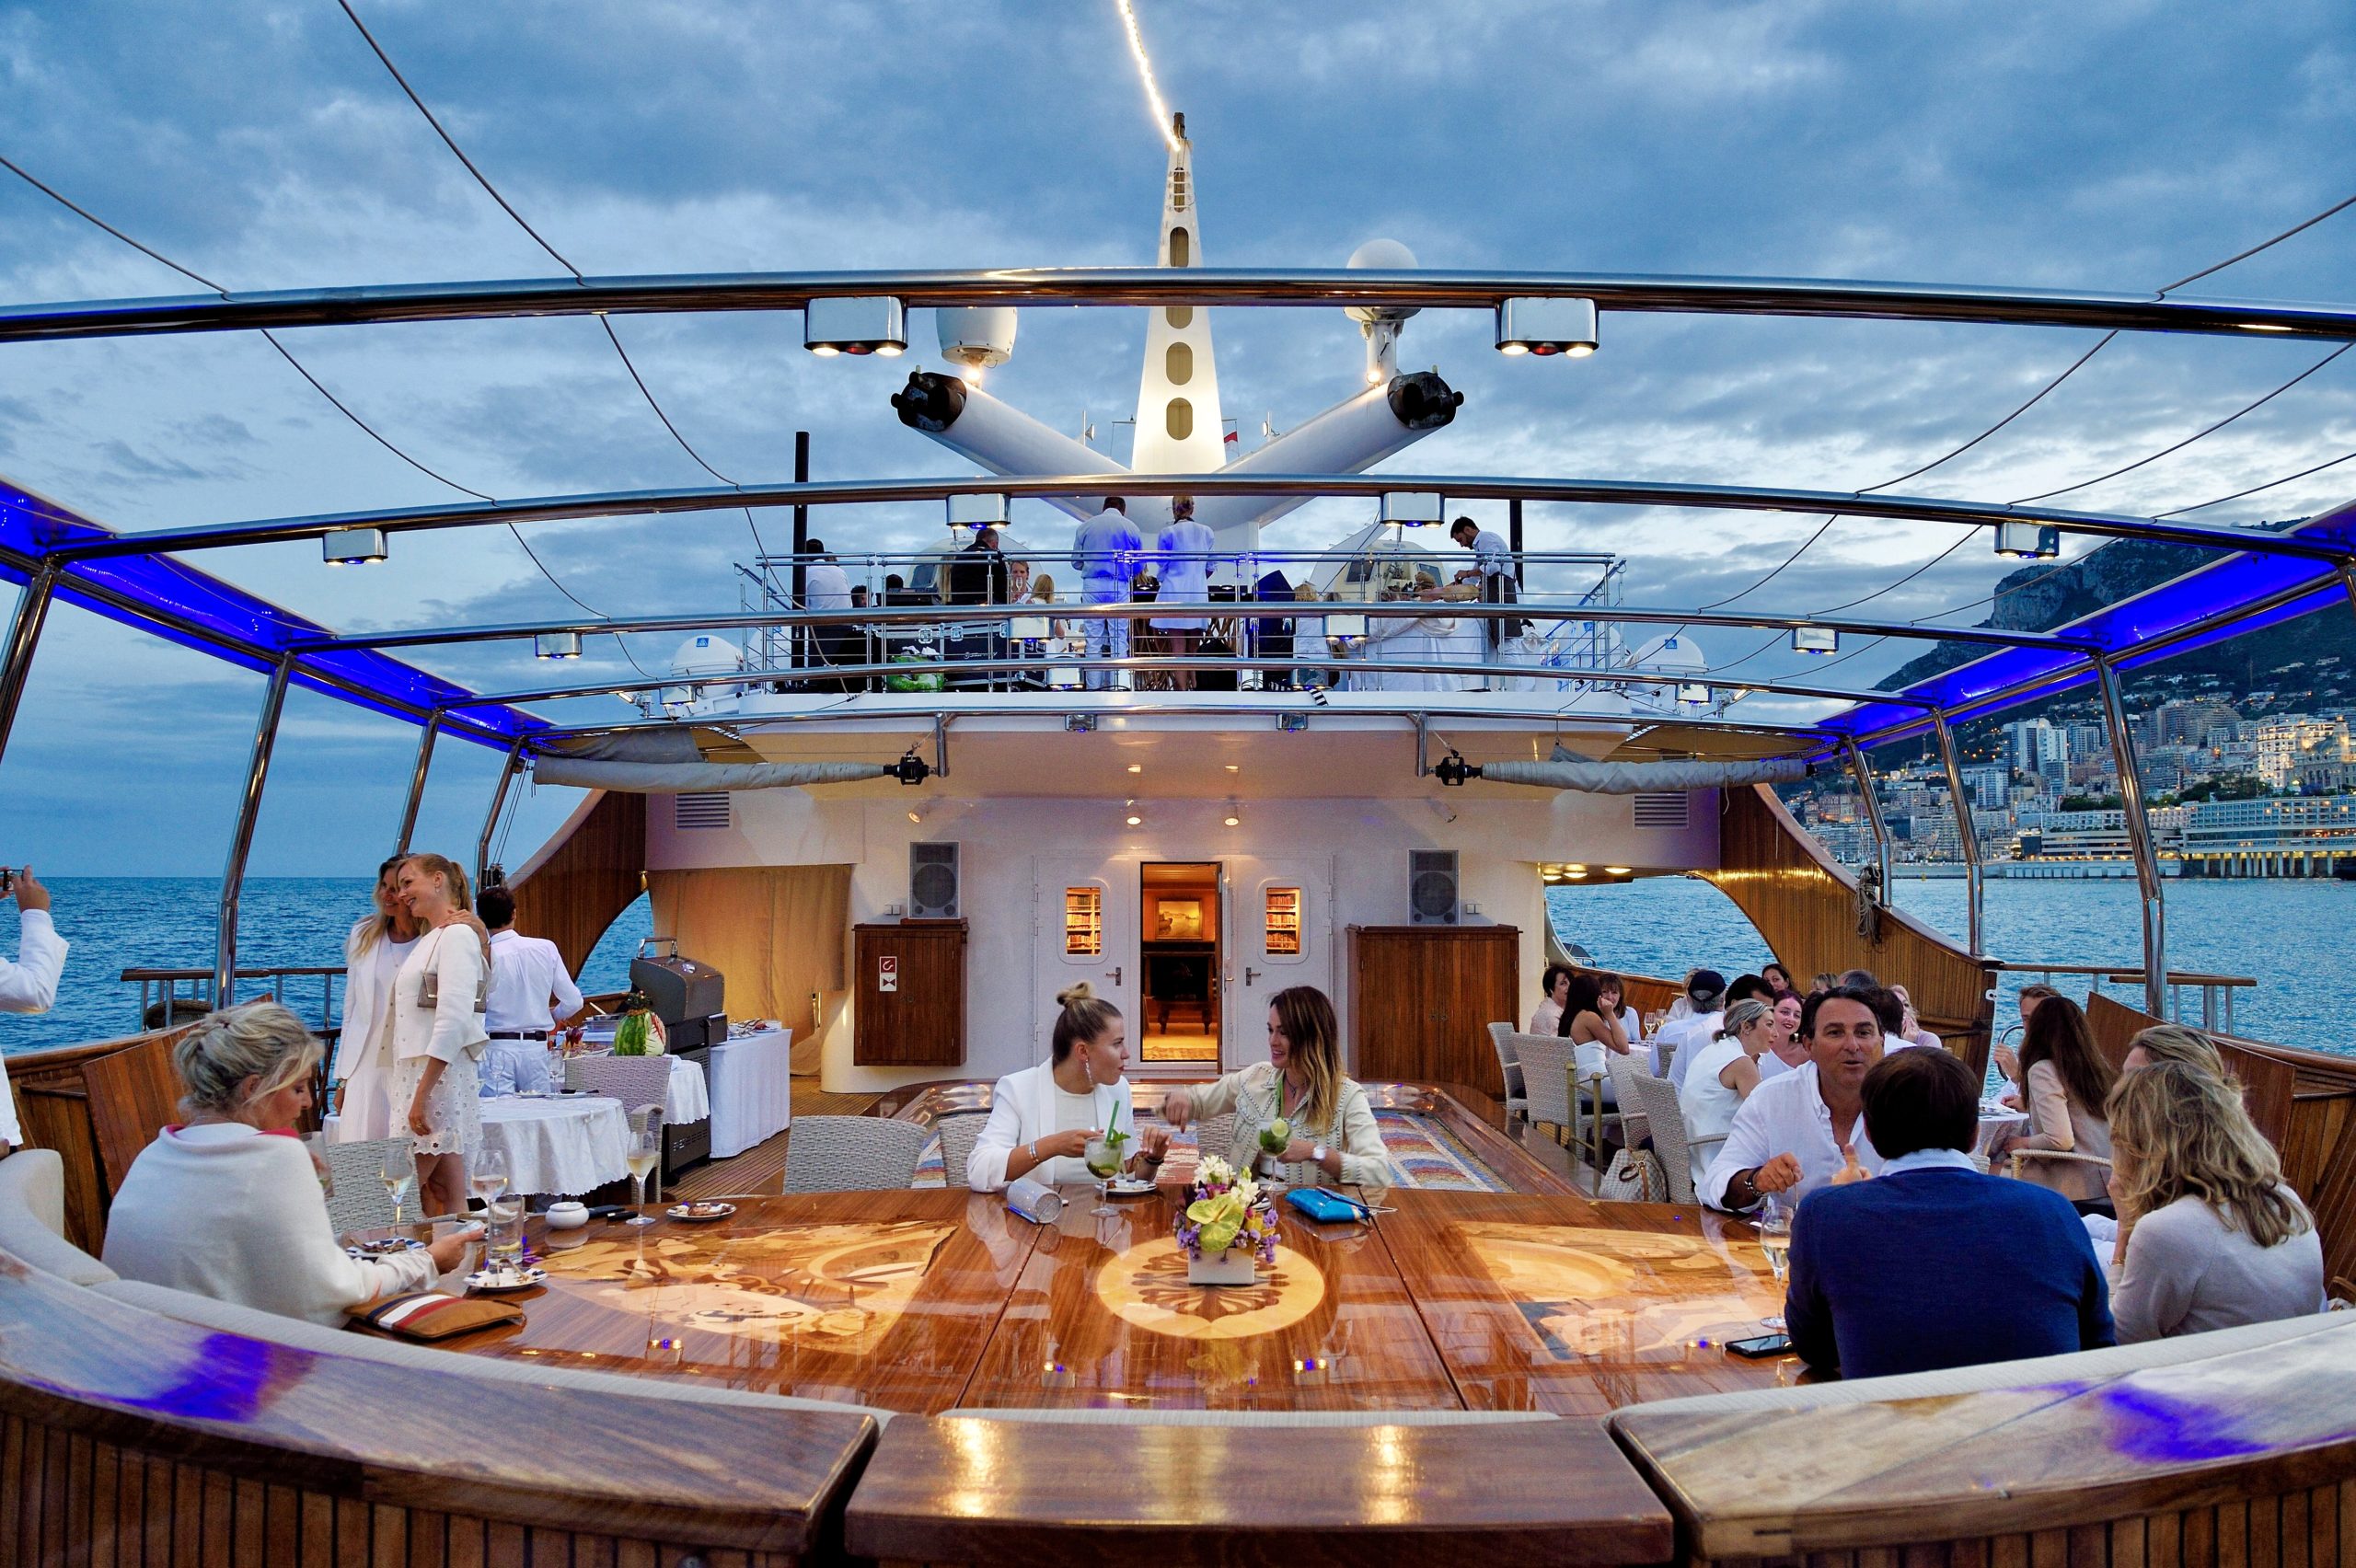 Throwing a party onboard a yacht - by Marcela